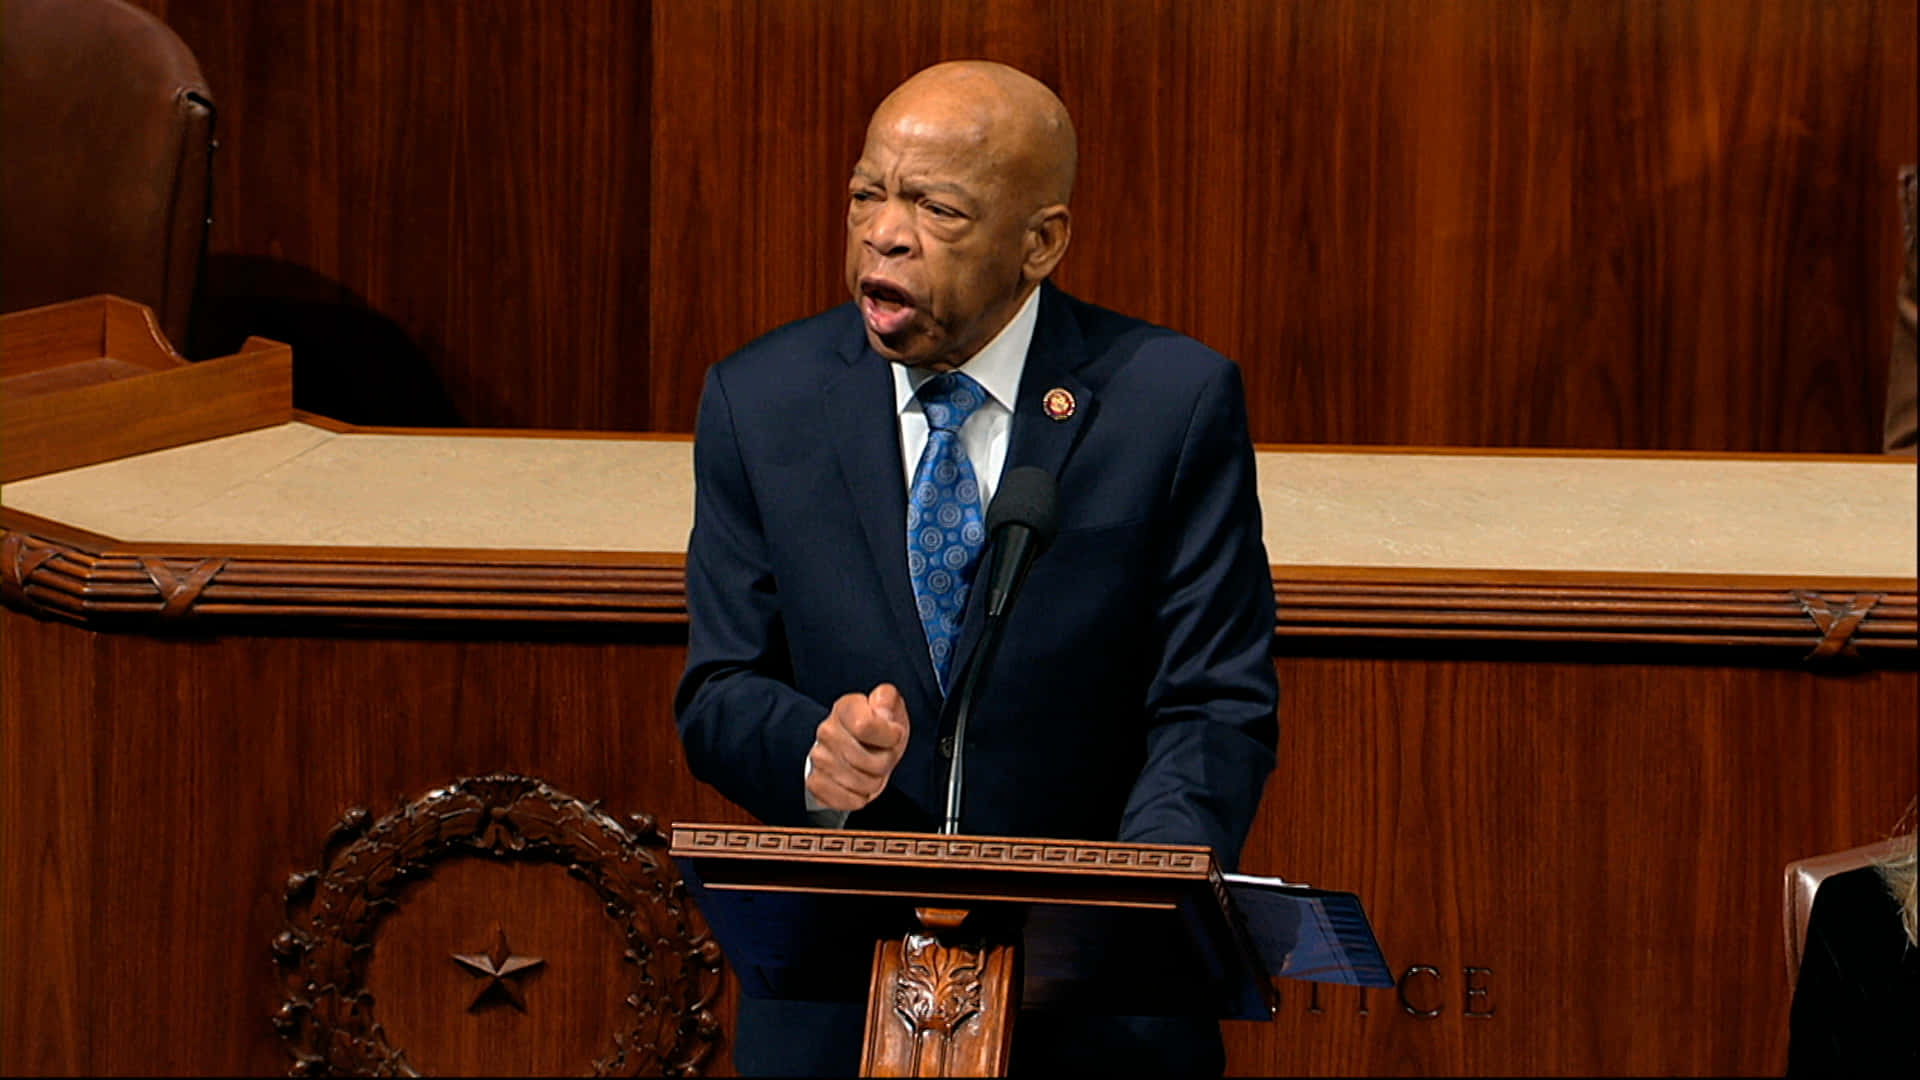 John Lewis Delivers Speech at House of Representatives Wallpaper